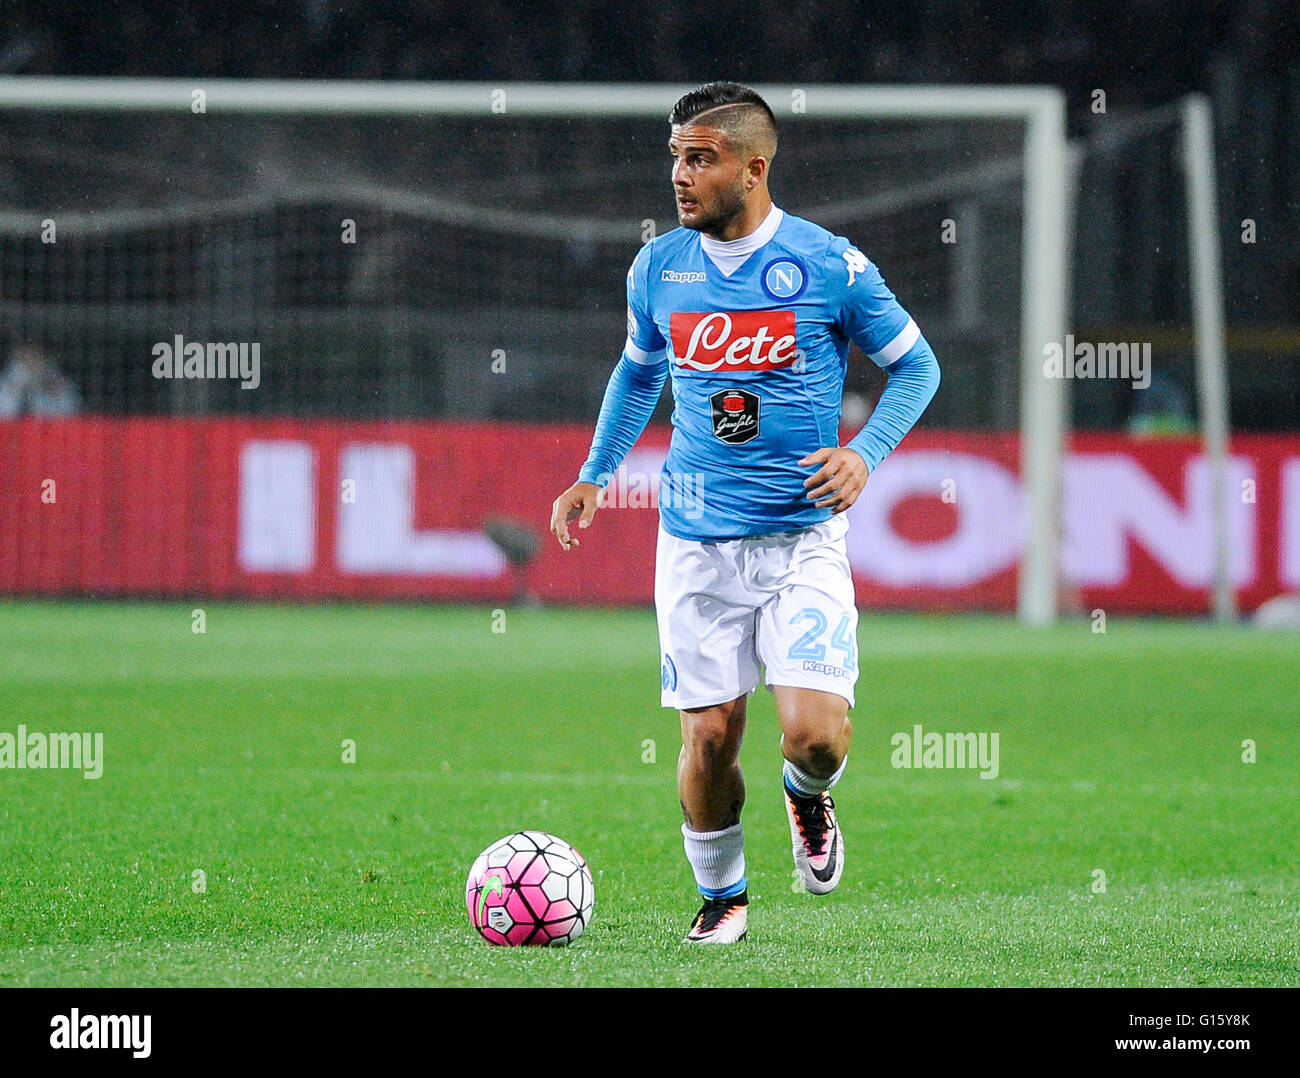 Turin, Italy. 8 may, 2016: Lorenzo Insigne in action during the Serie A football match between Torino FC and SSC Napoli Stock Photo